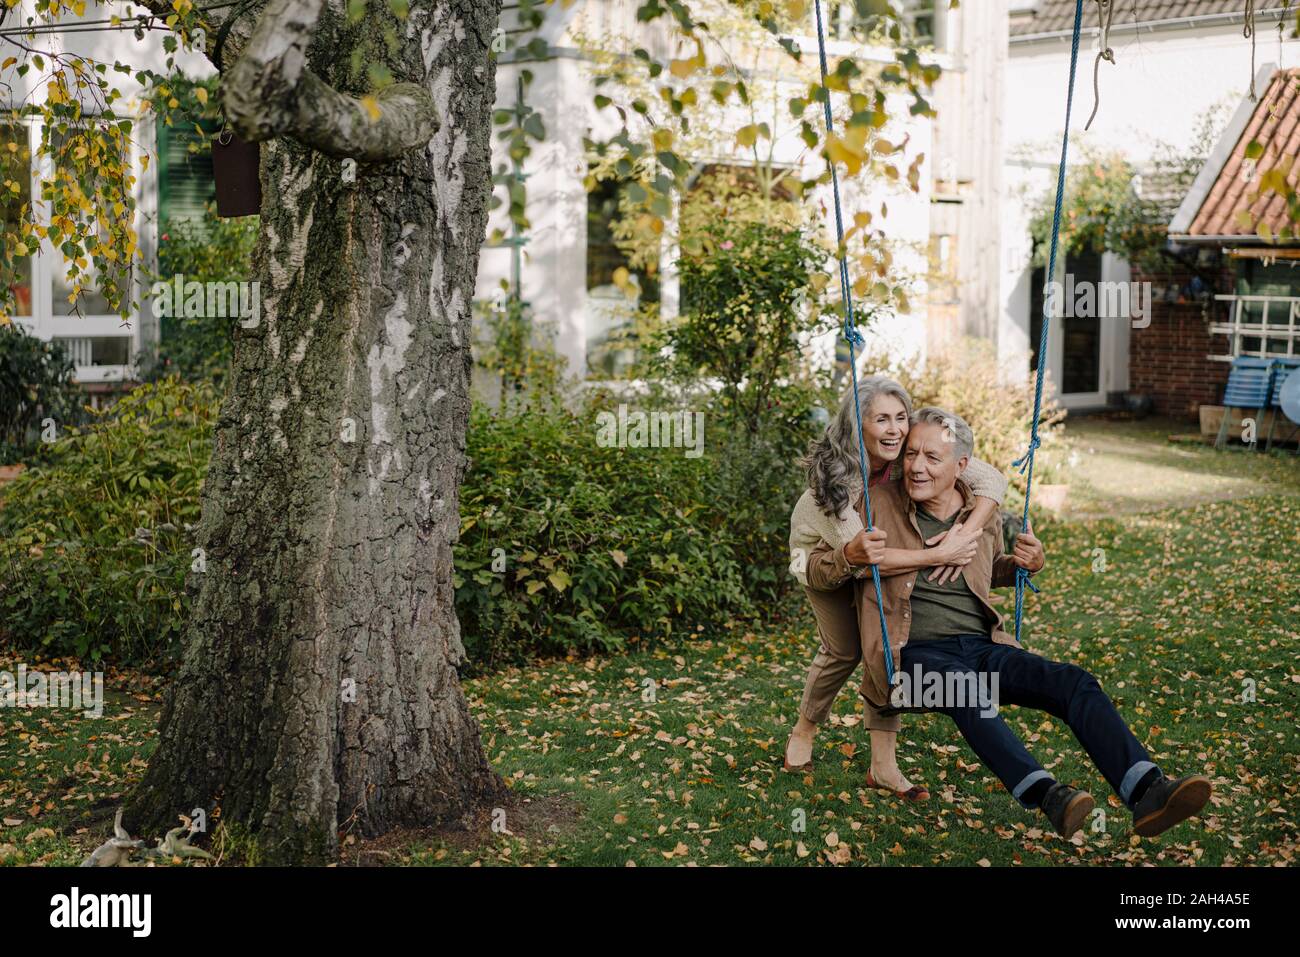 Happy woman embracing senior man on a swing in garden Stock Photo